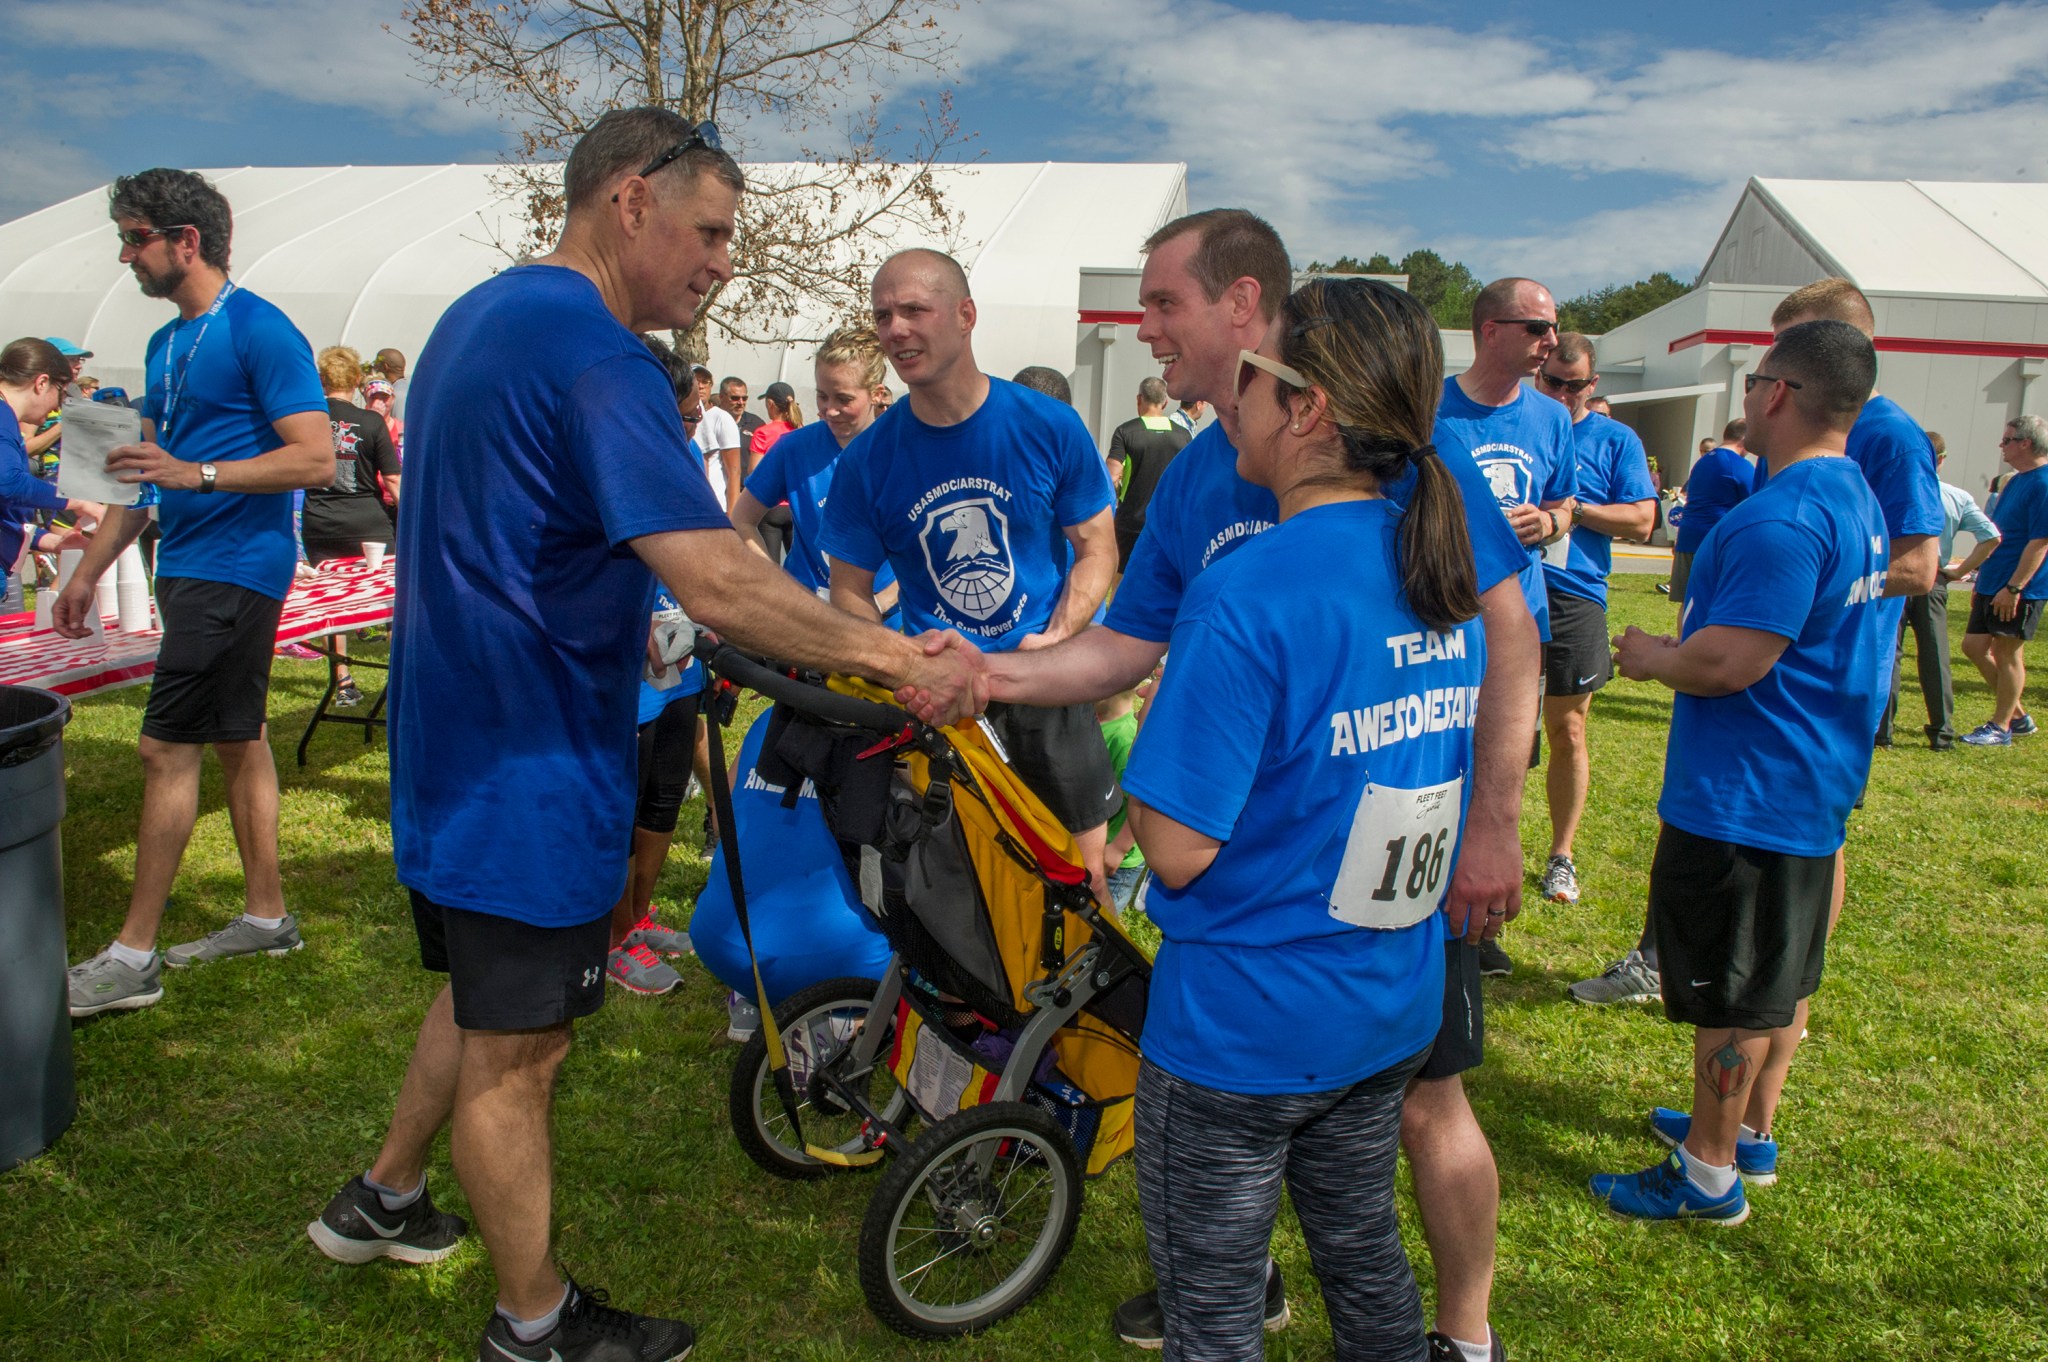 Lieutenant-General David L. Mann, front left, greets fellow participants in the 9th annual MSFC Running Club’s 5K.